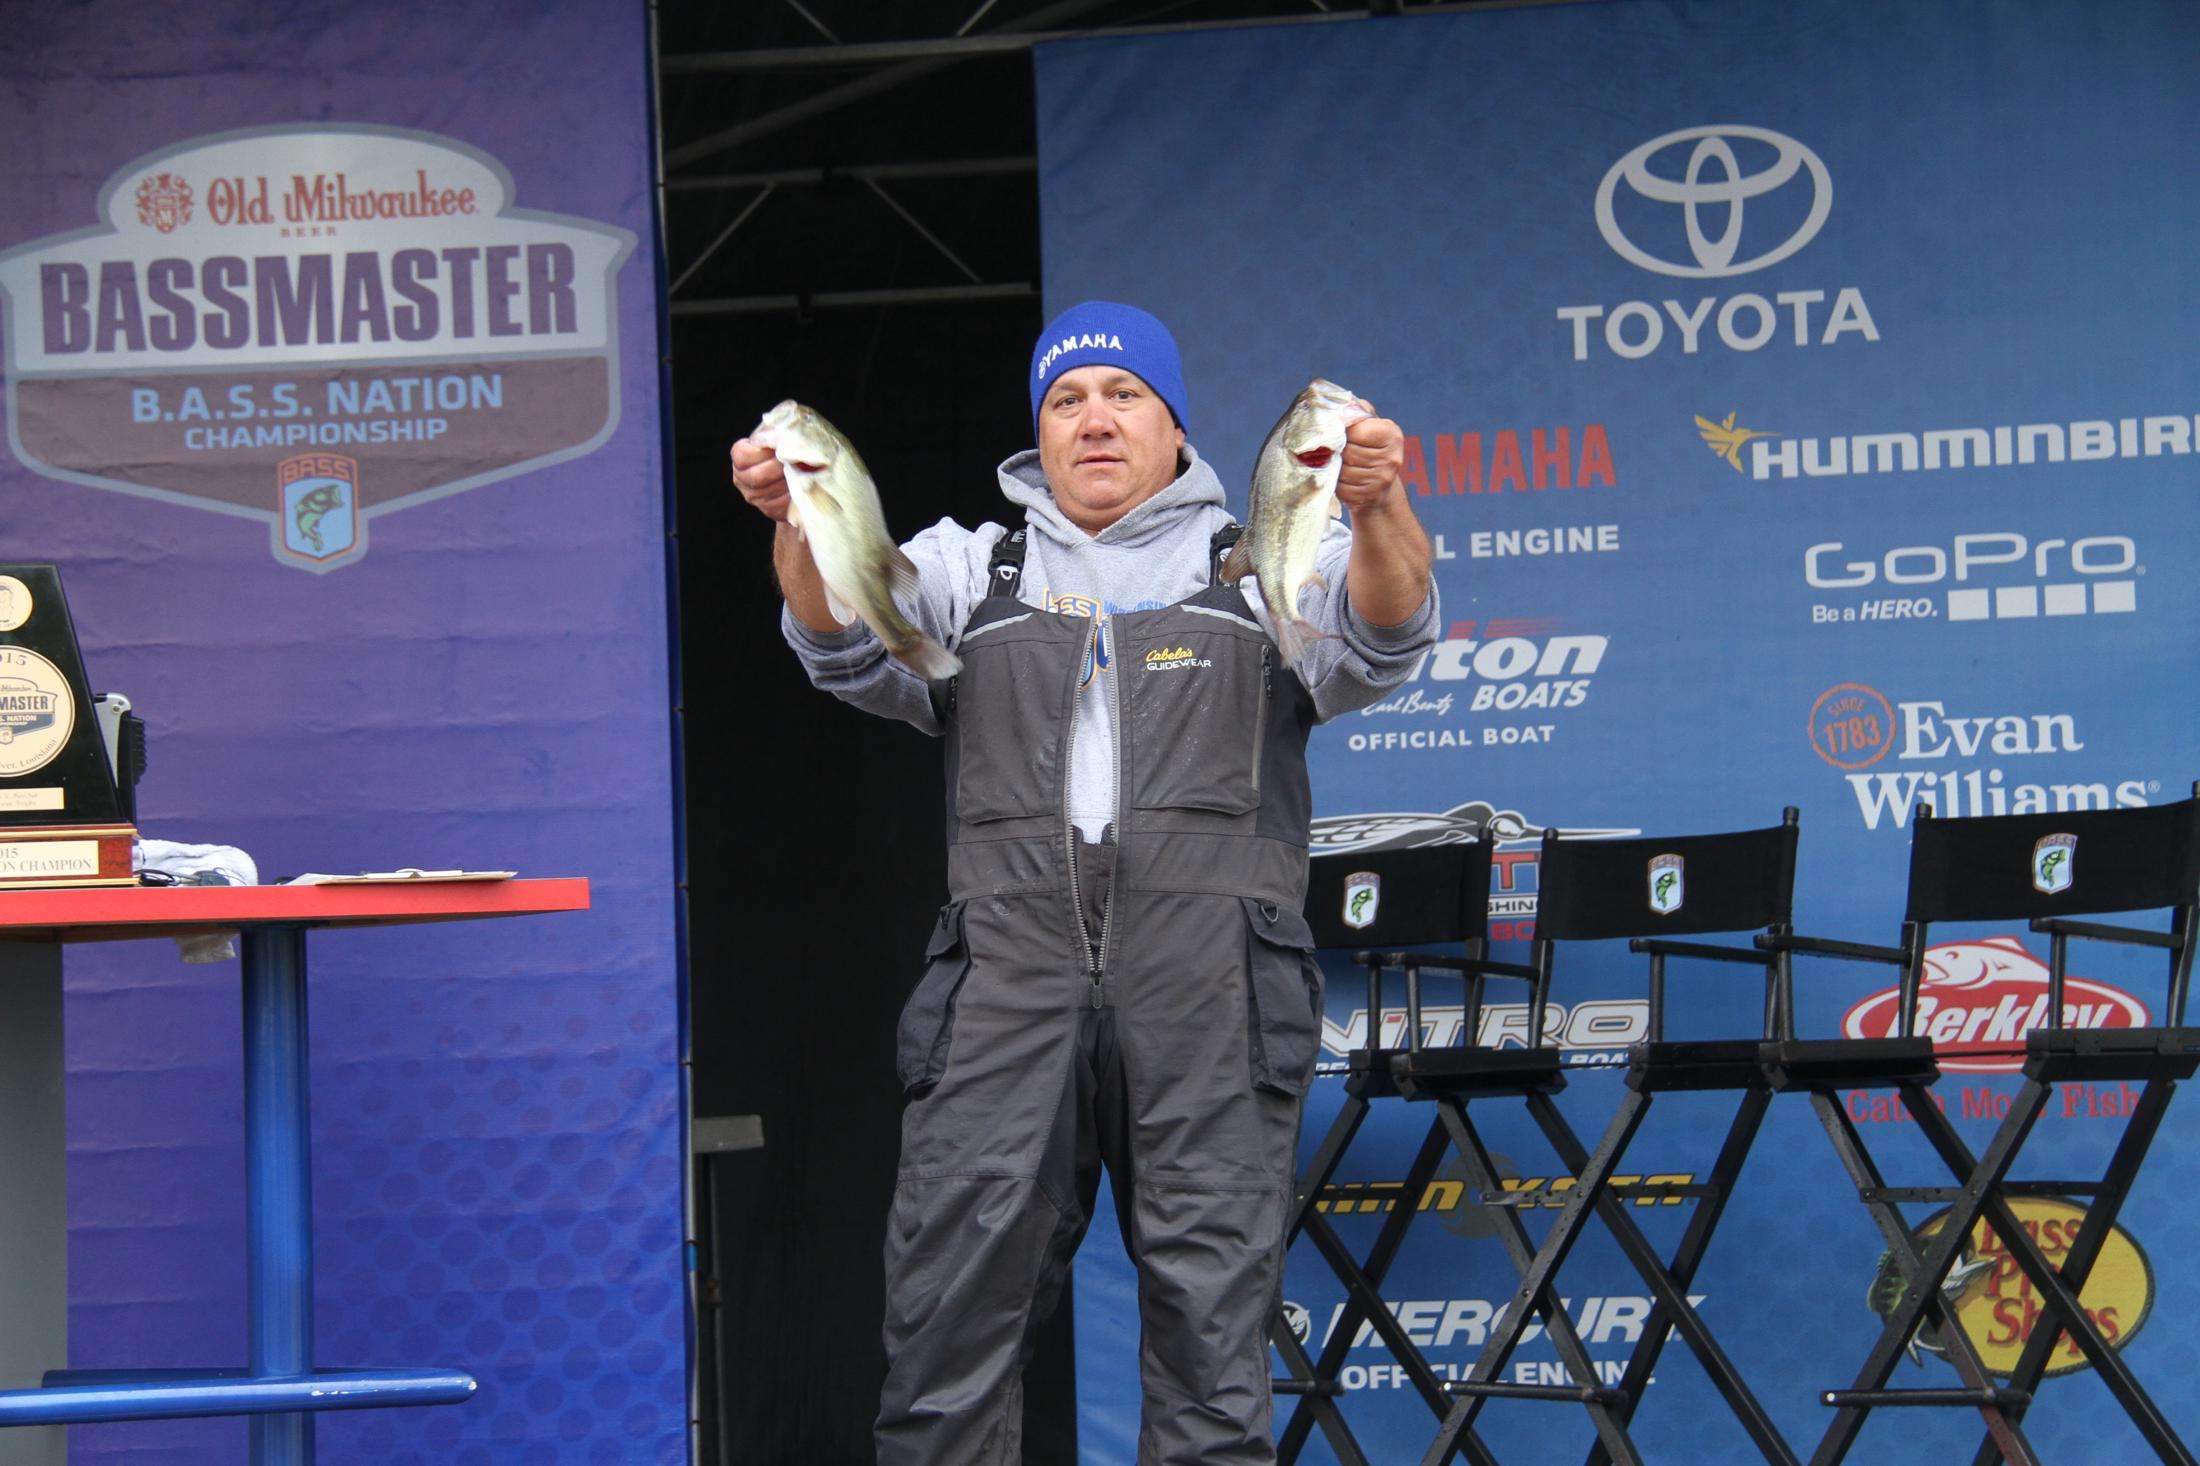 Gary Adkins, 25-1, 16th place